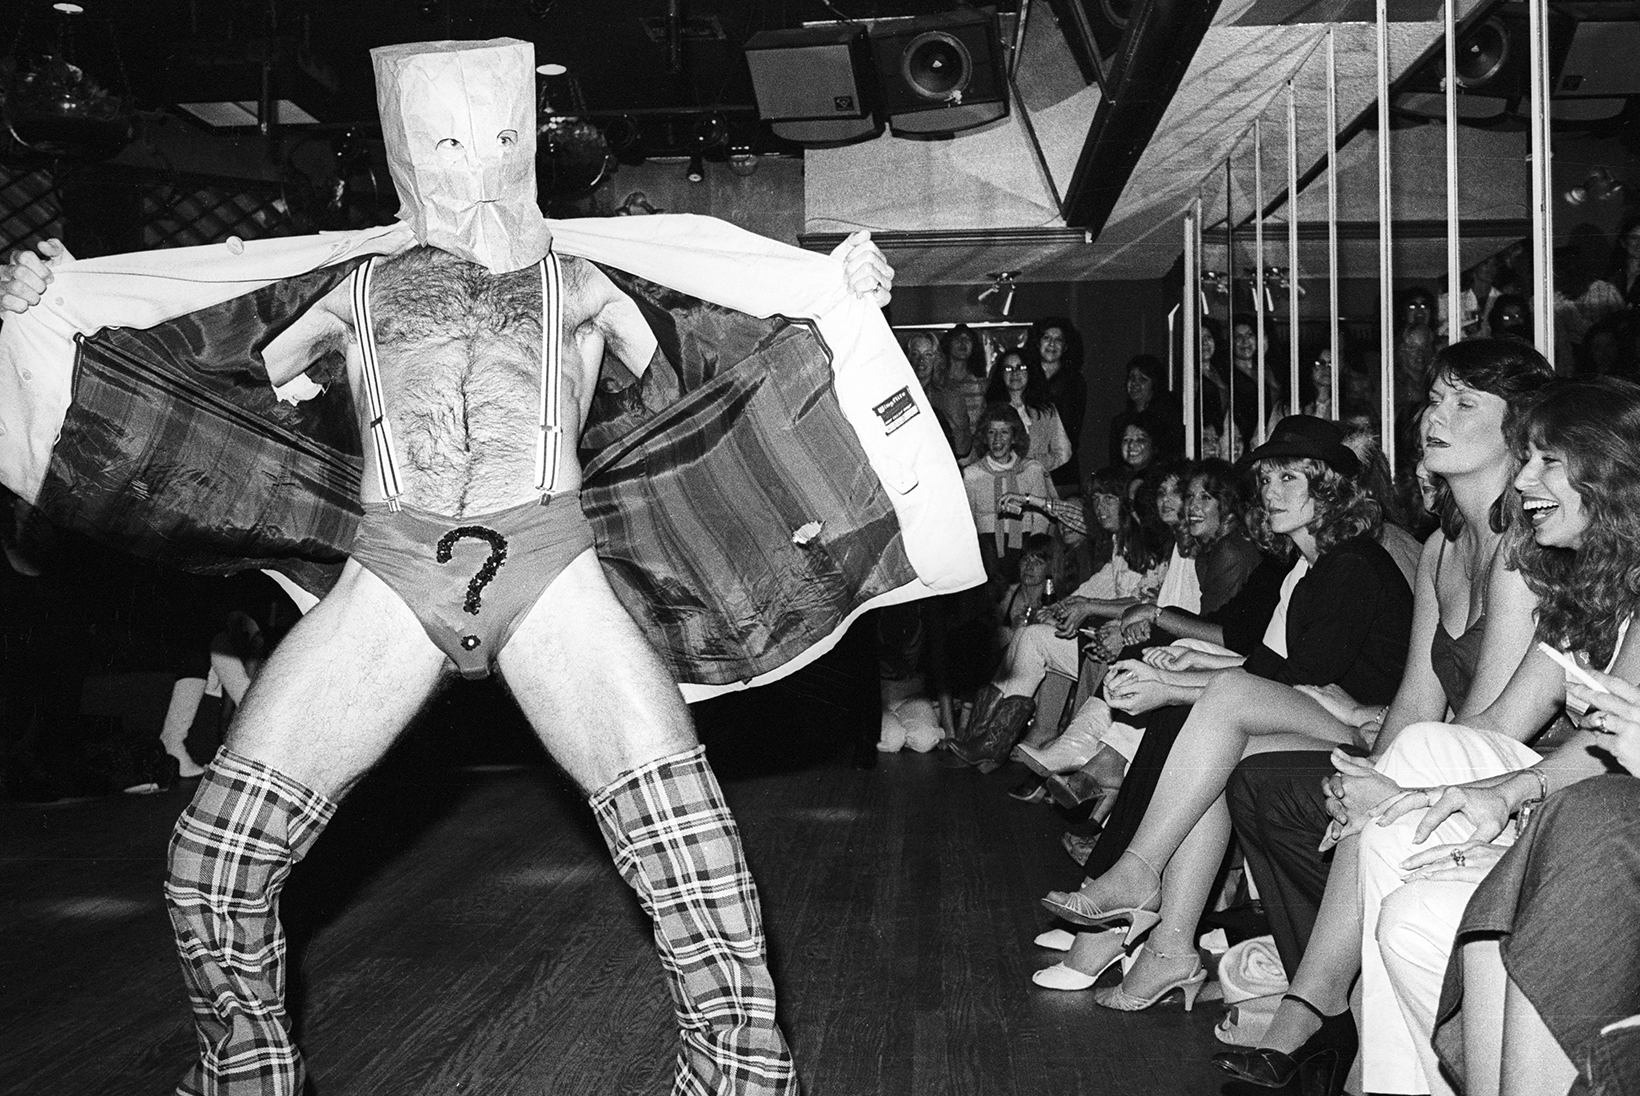 Chippendales dancer in Los Angeles in 1981 performs with a paper bag with cutouts over his head. He stands and opens a sports jacket revealing suspenders attached to underwear with a large question mark on the front.